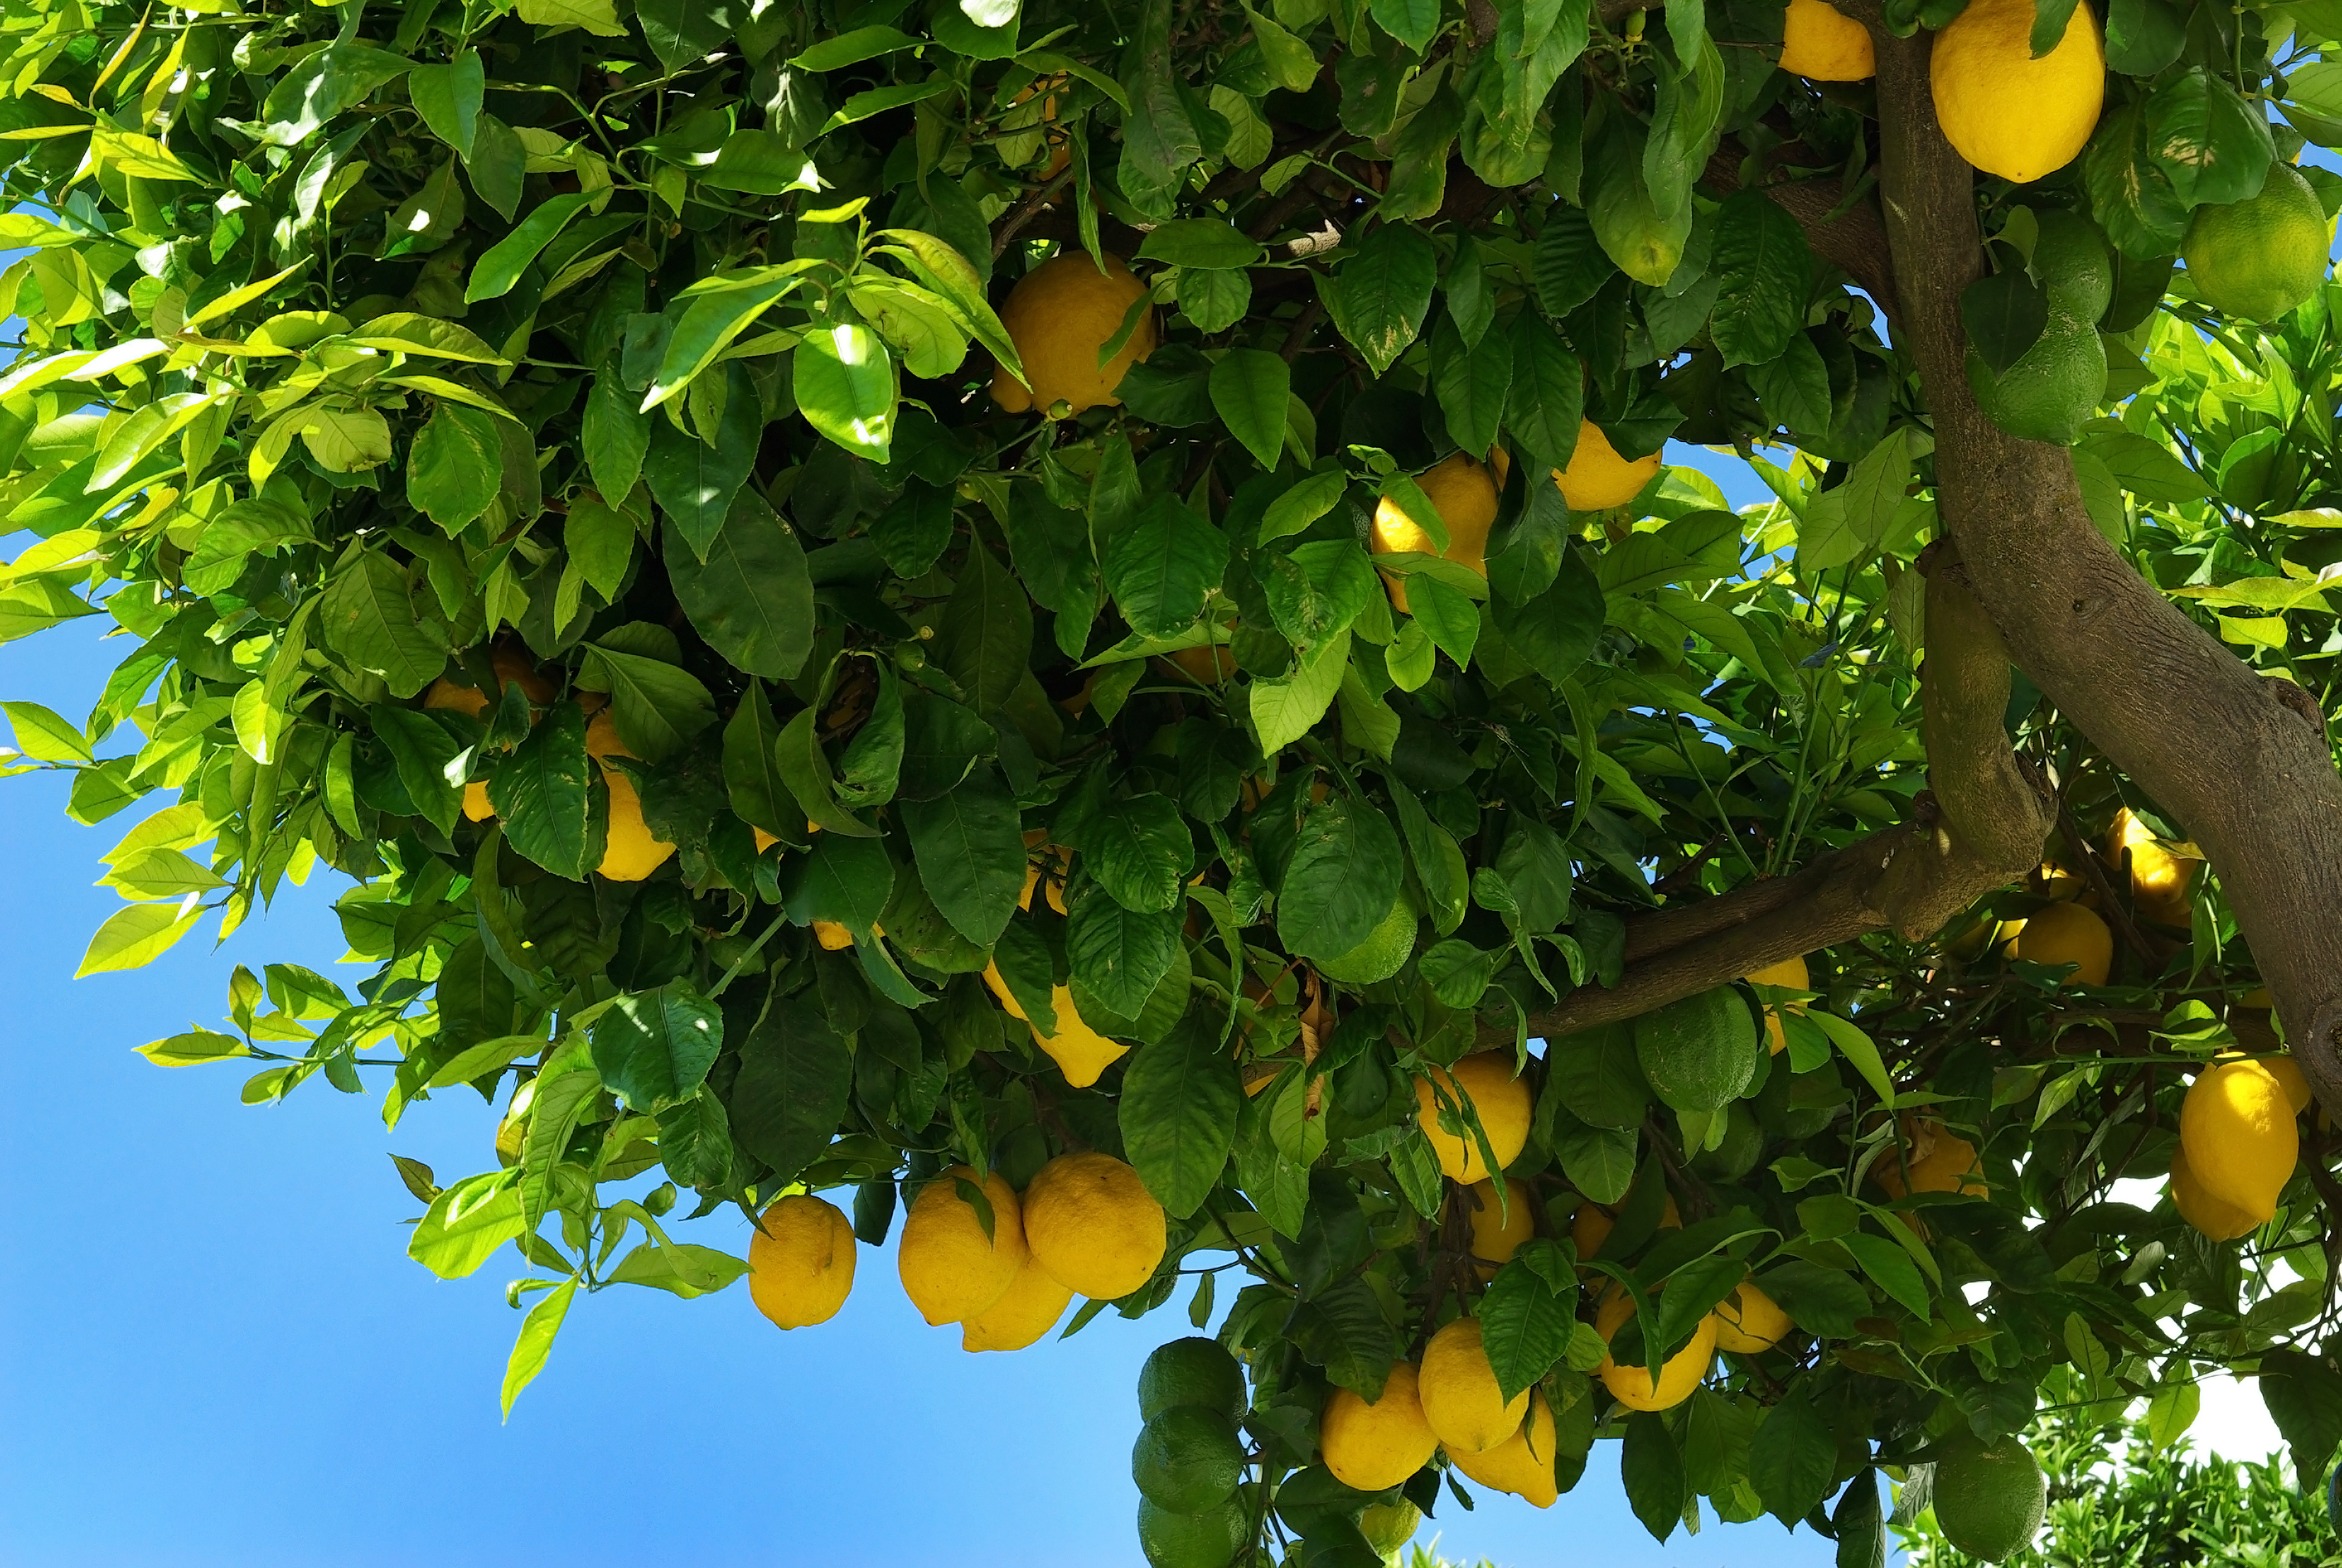 Image of Bay laurel and citrus trees companion planting